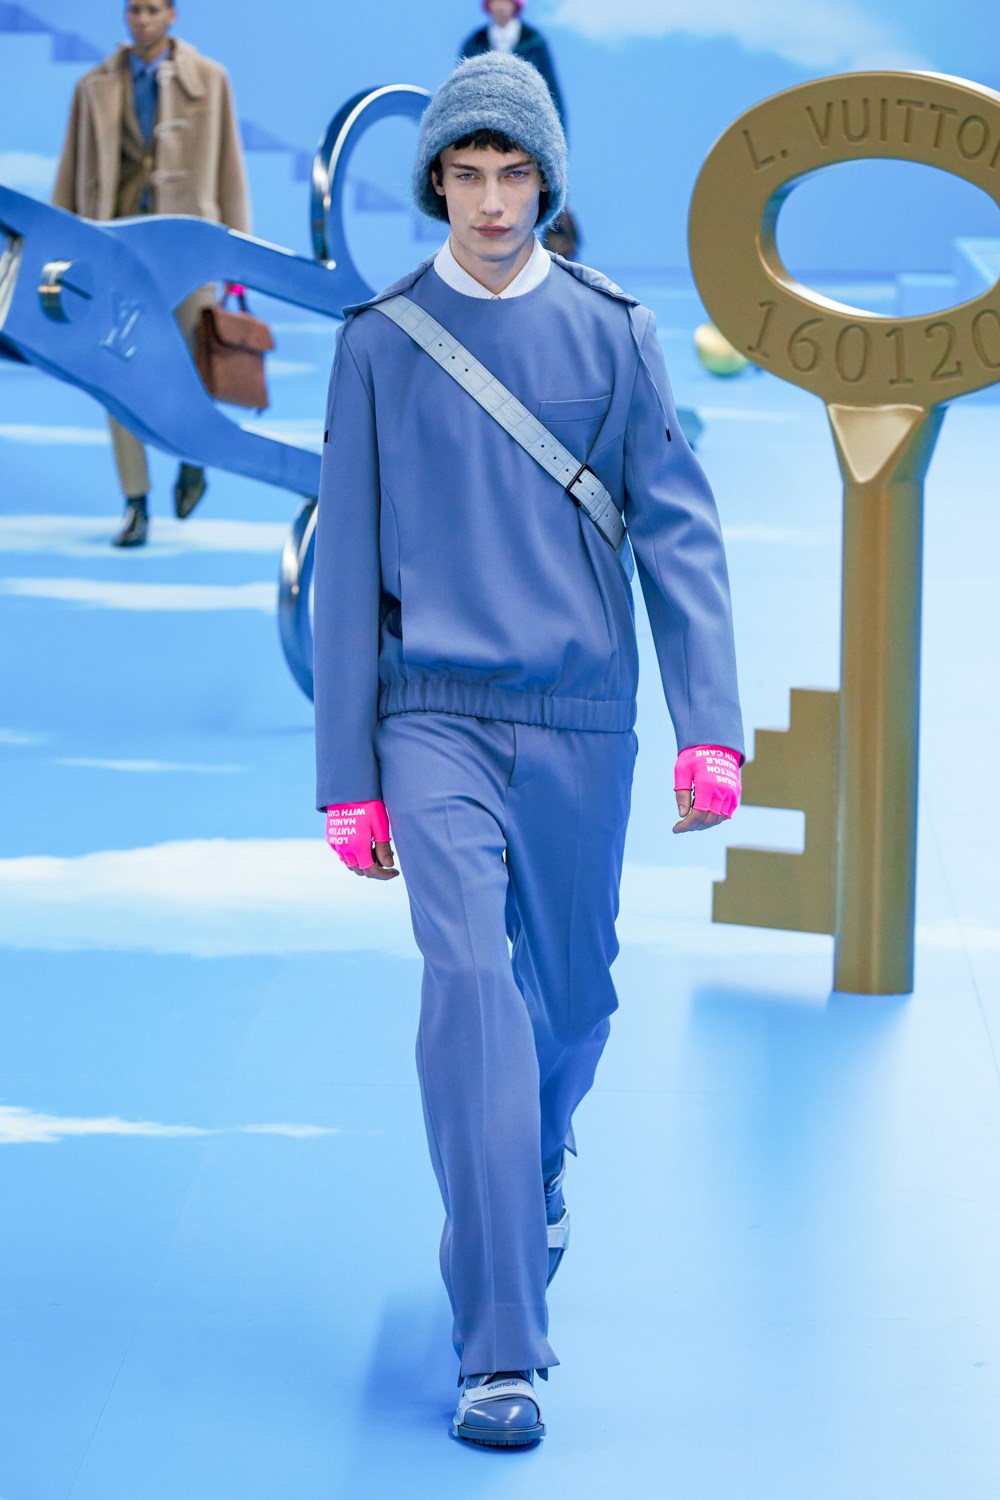 Top 10 Fall 2020 Men's Fashion Shows | The Impression